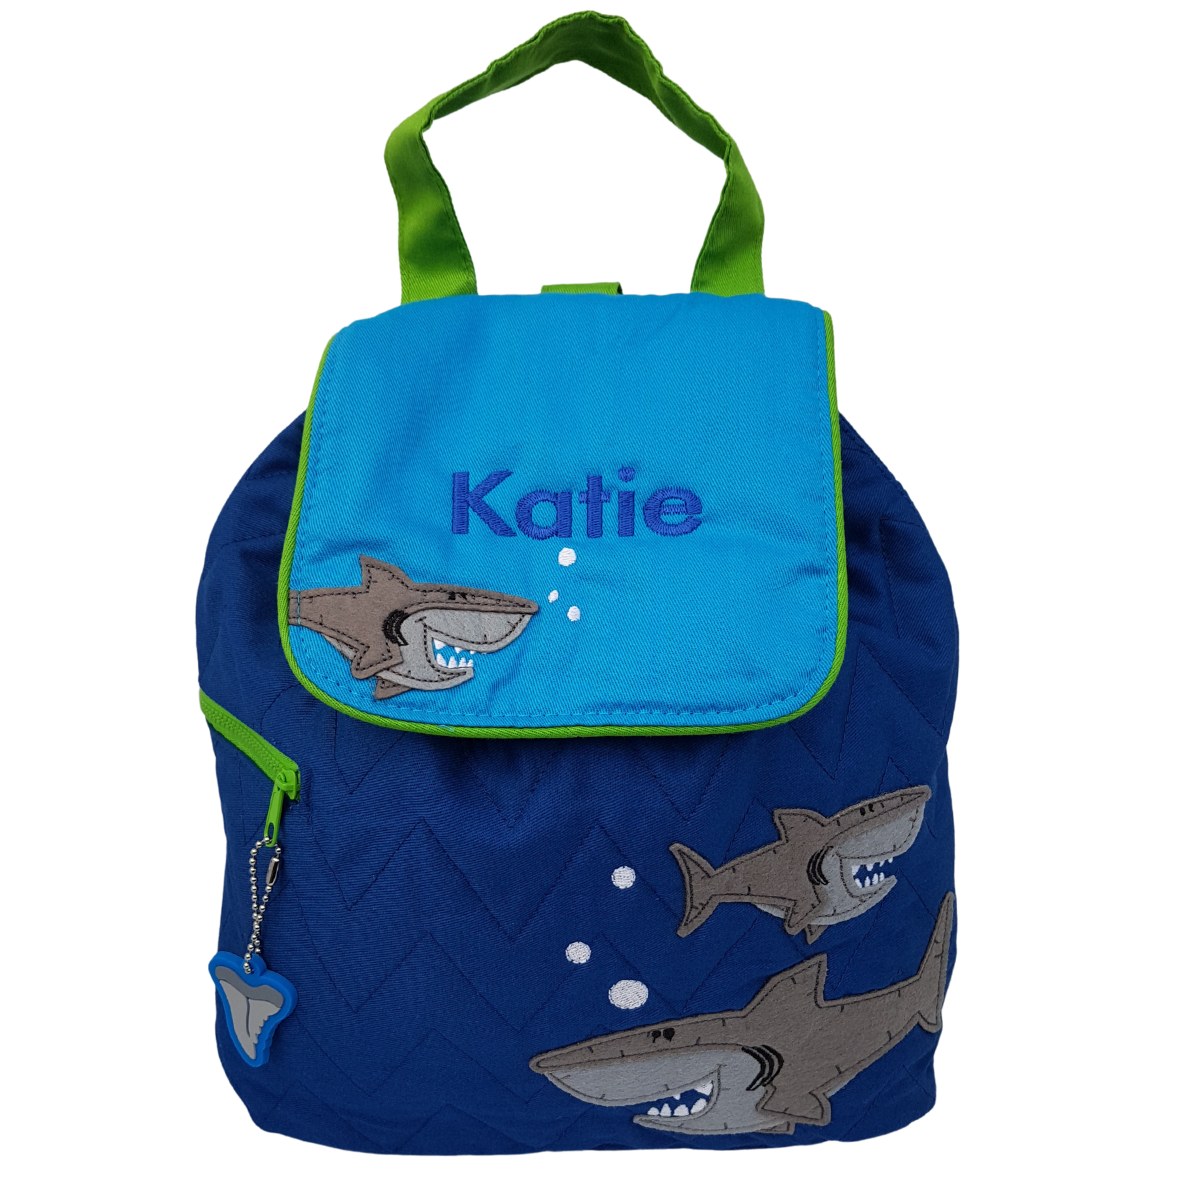 Personalised Stephen Joseph shark child's backpack made from royal blue quilted fabric with a grey shark design on the front. The opening flap which is mid blue can be embroidered with a name of your choice